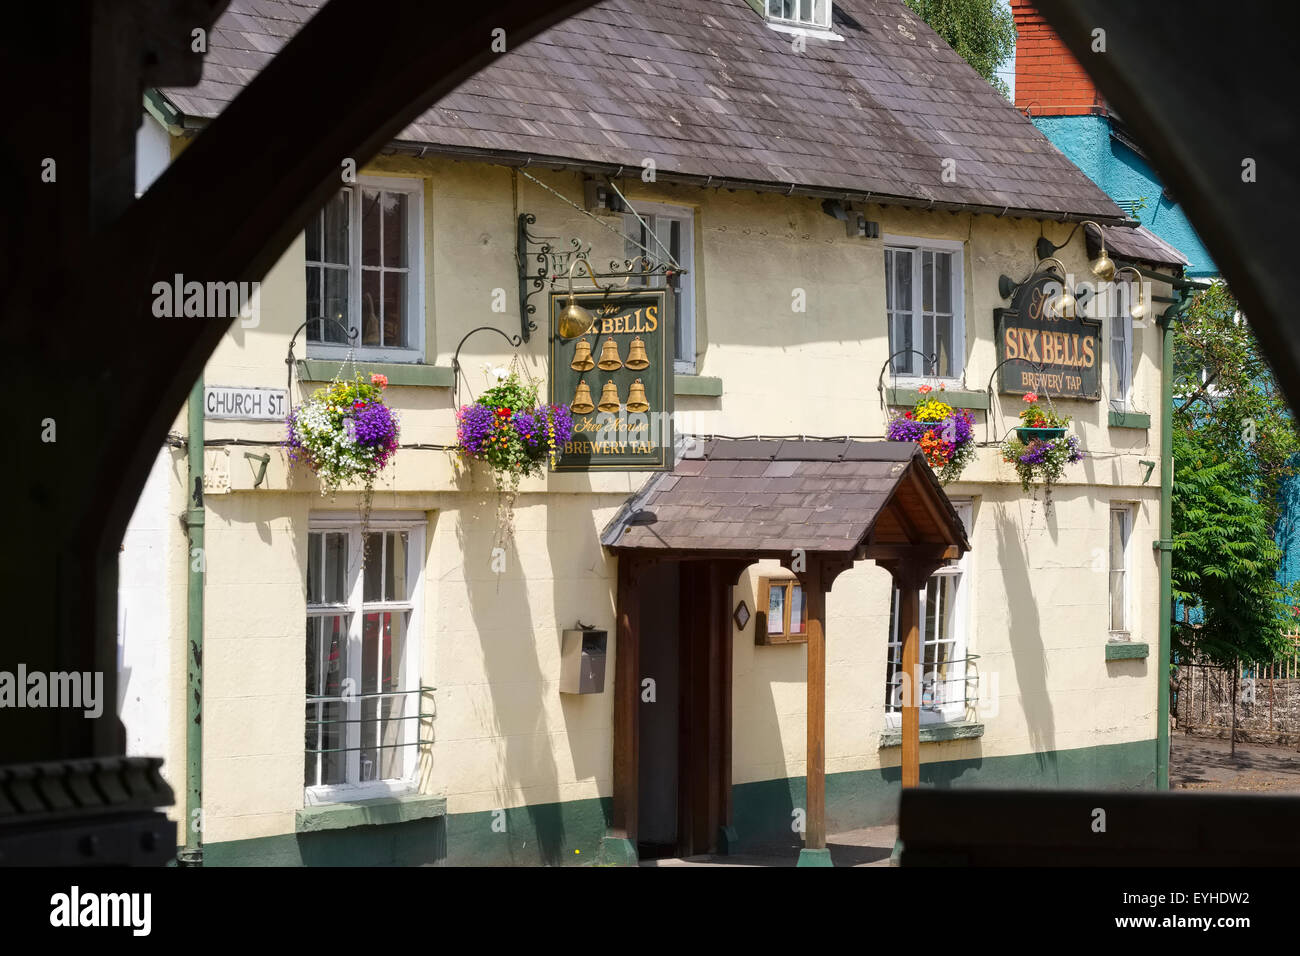 The Six Bells pub and brewery in Bishop's Castle, Shropshire, England, UK. Stock Photo